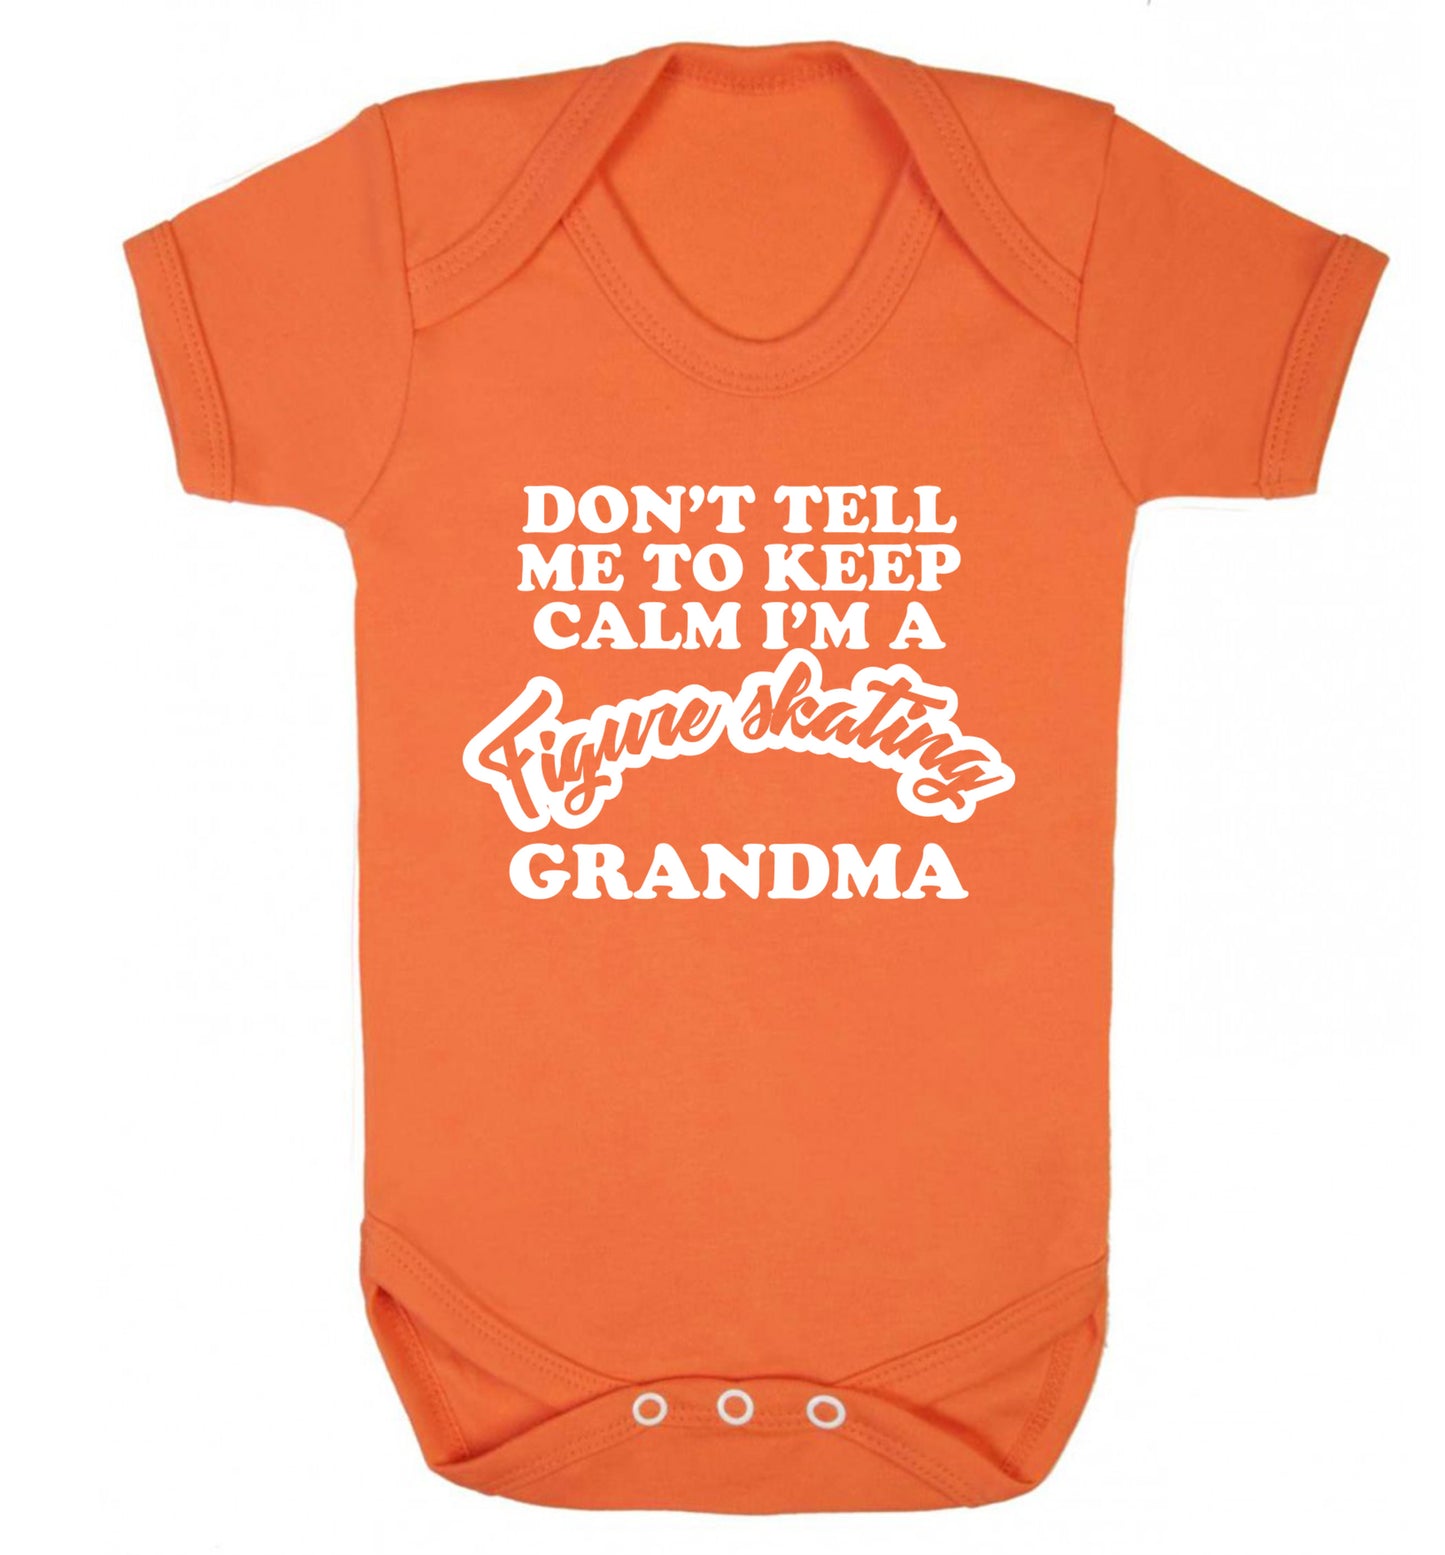 Don't tell me to keep calm I'm a figure skating grandma Baby Vest orange 18-24 months